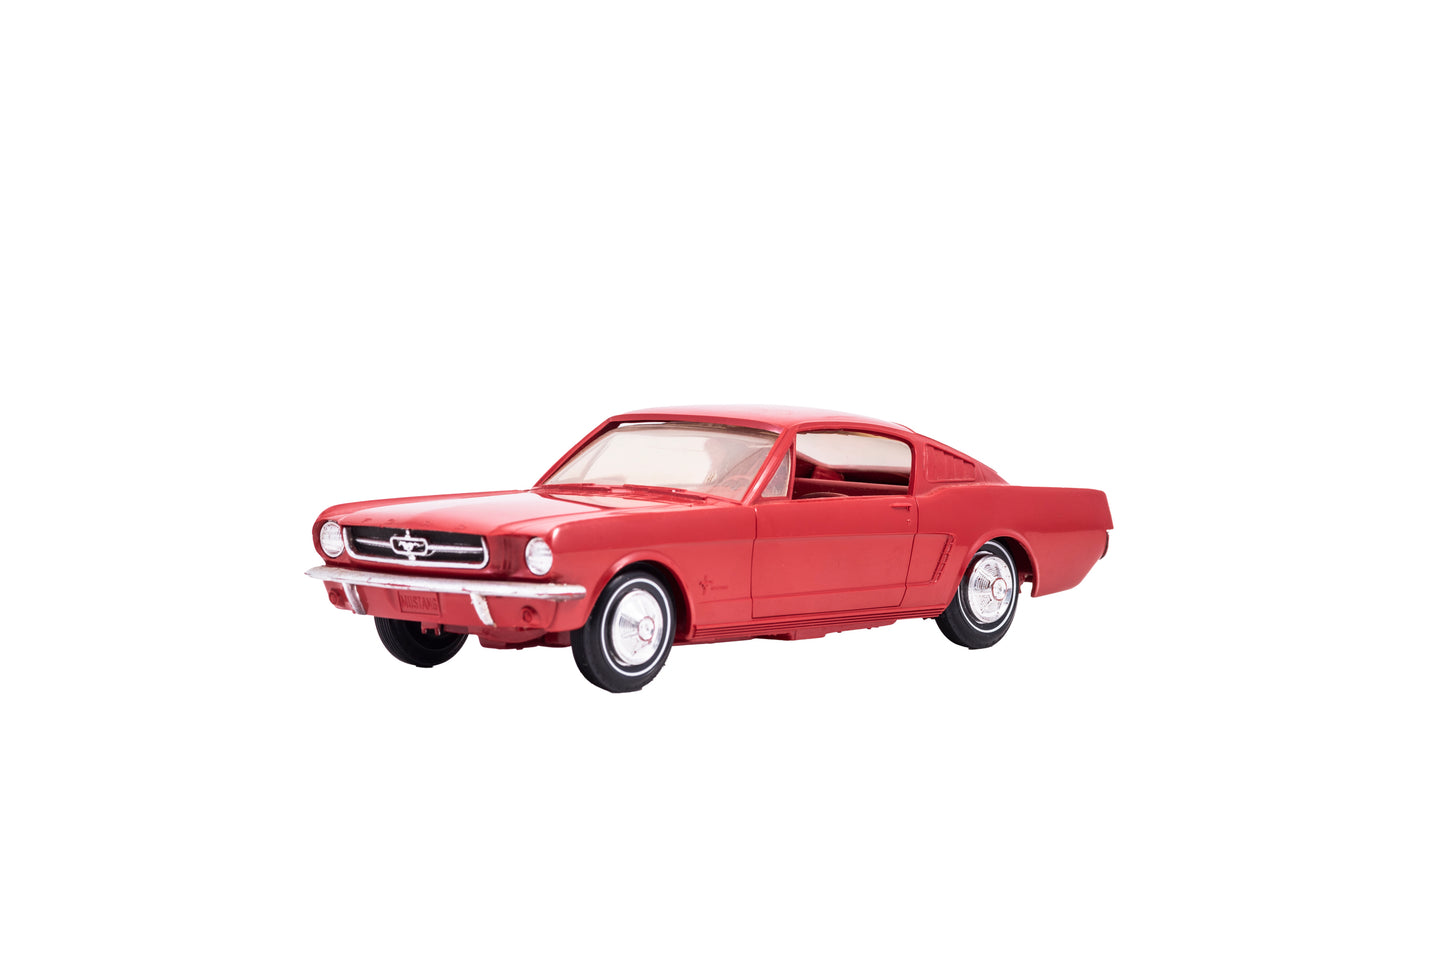 1966 Mustang Fastback Ford Dealer Promo Model from AMT